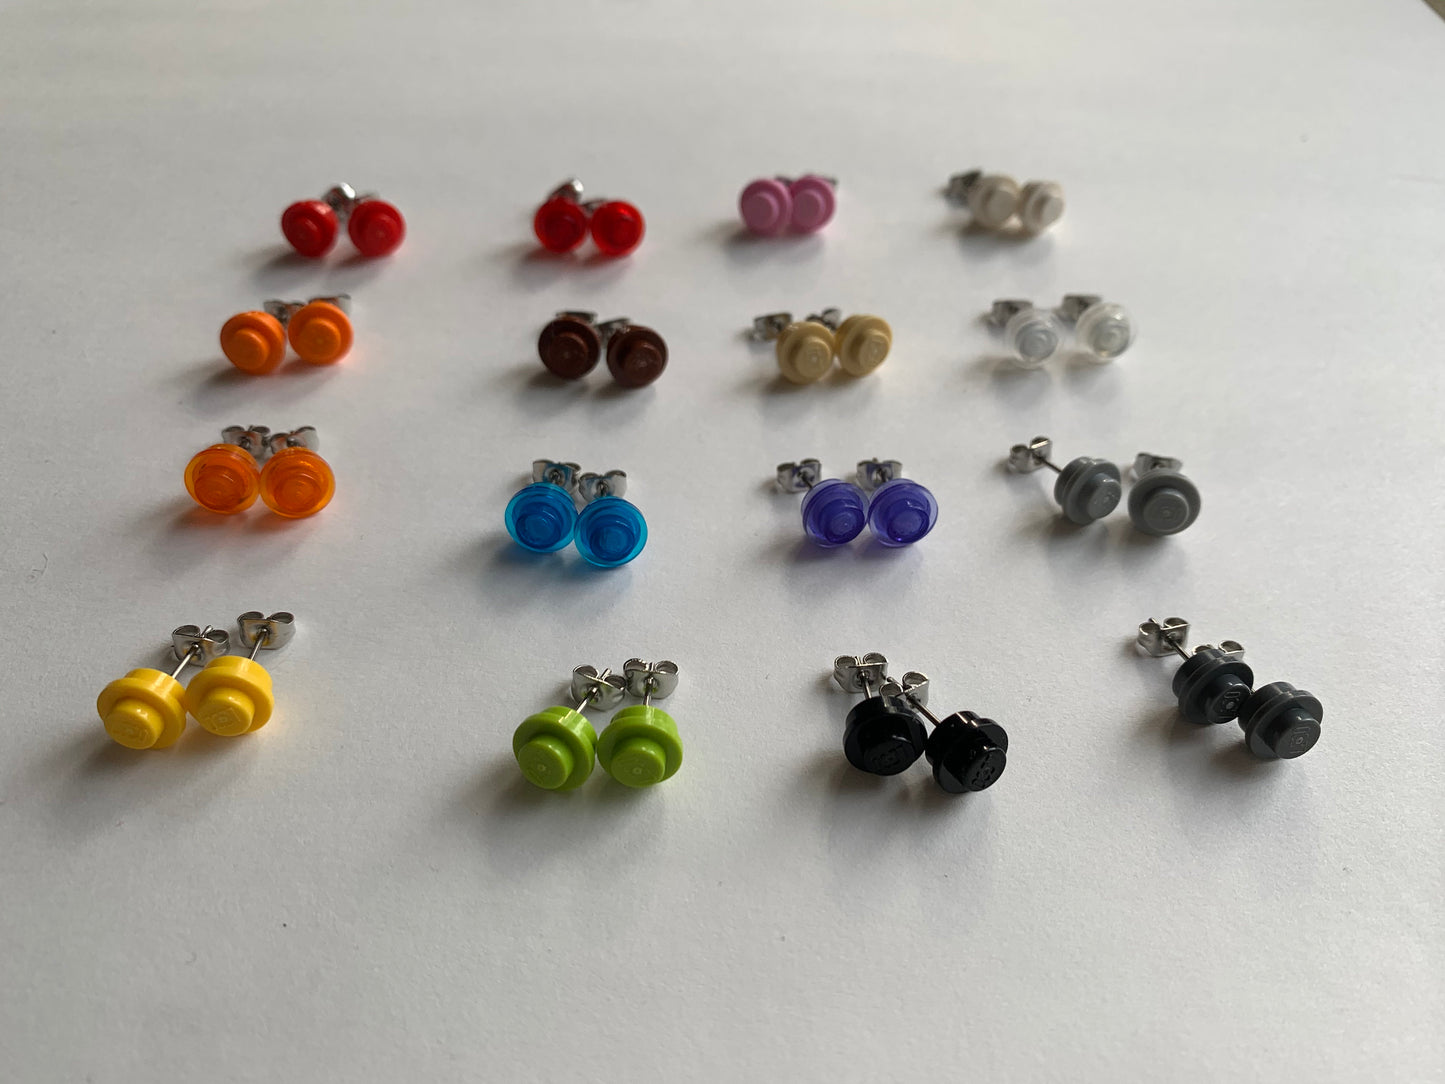 16 brick stud earring pairs of different colors